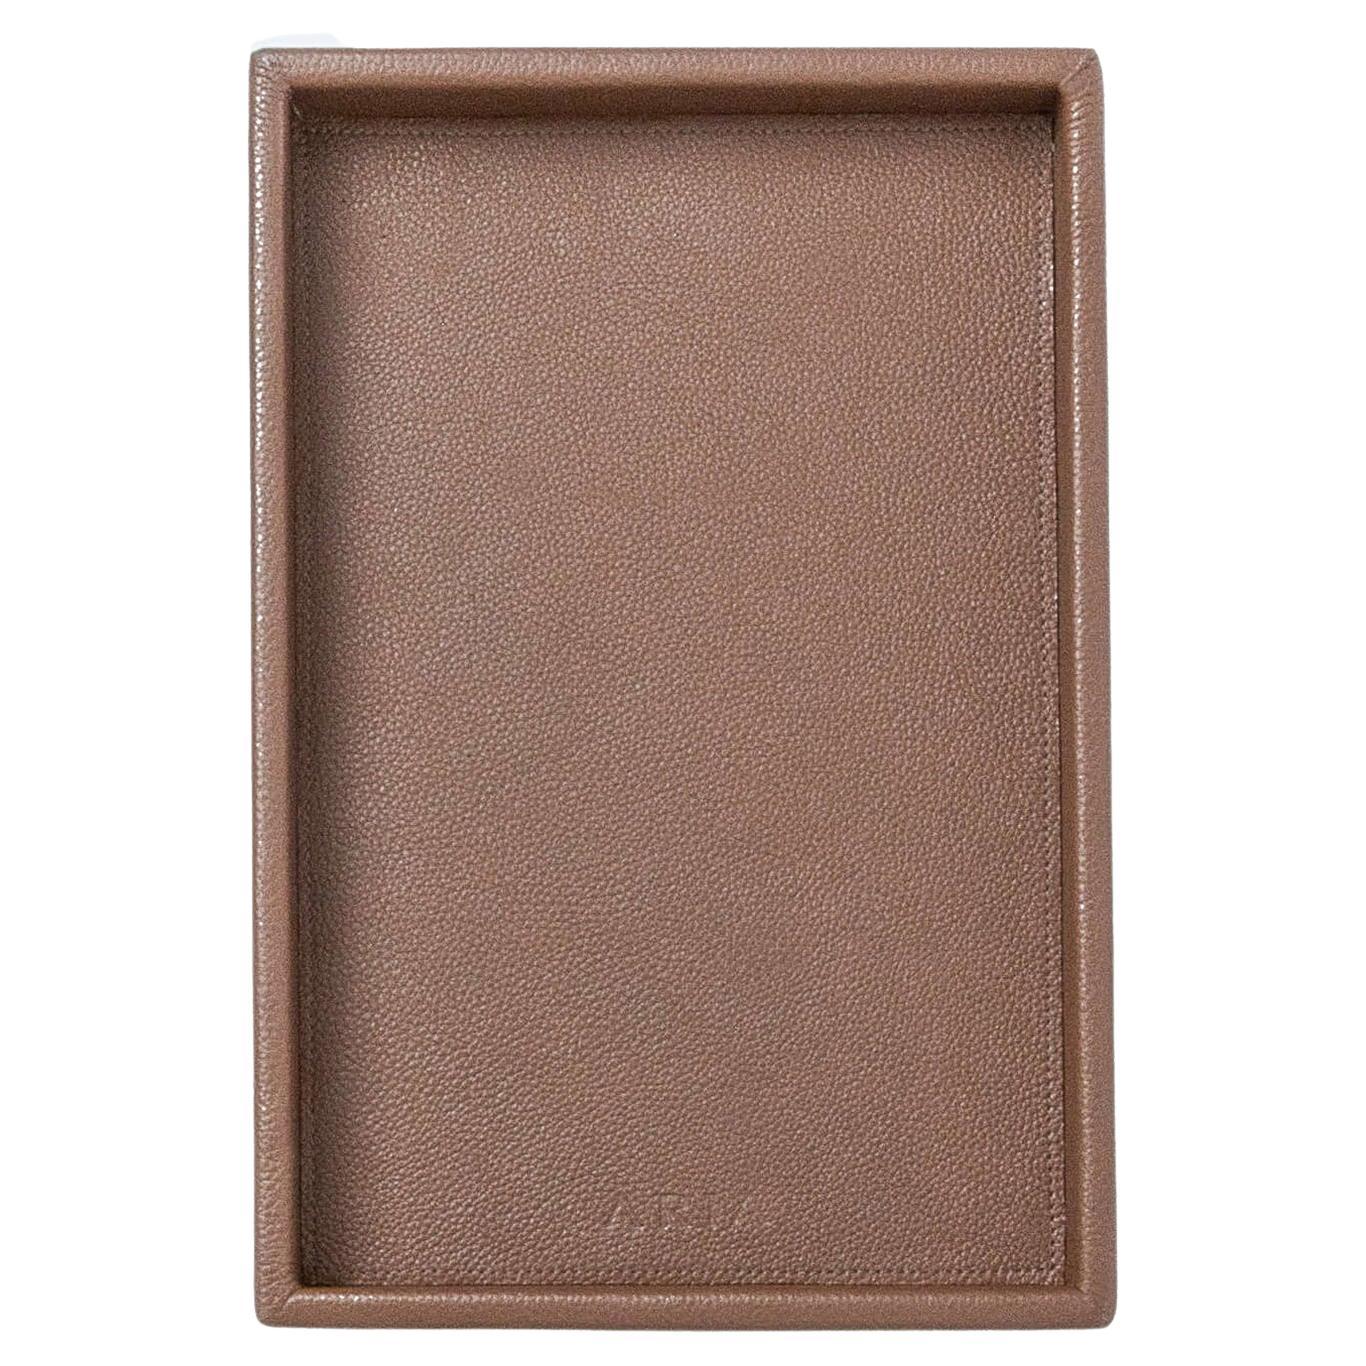 Modern Leather Tray, Medium B Rectangular Tray, Handmade in Brazil - Color: Clay For Sale